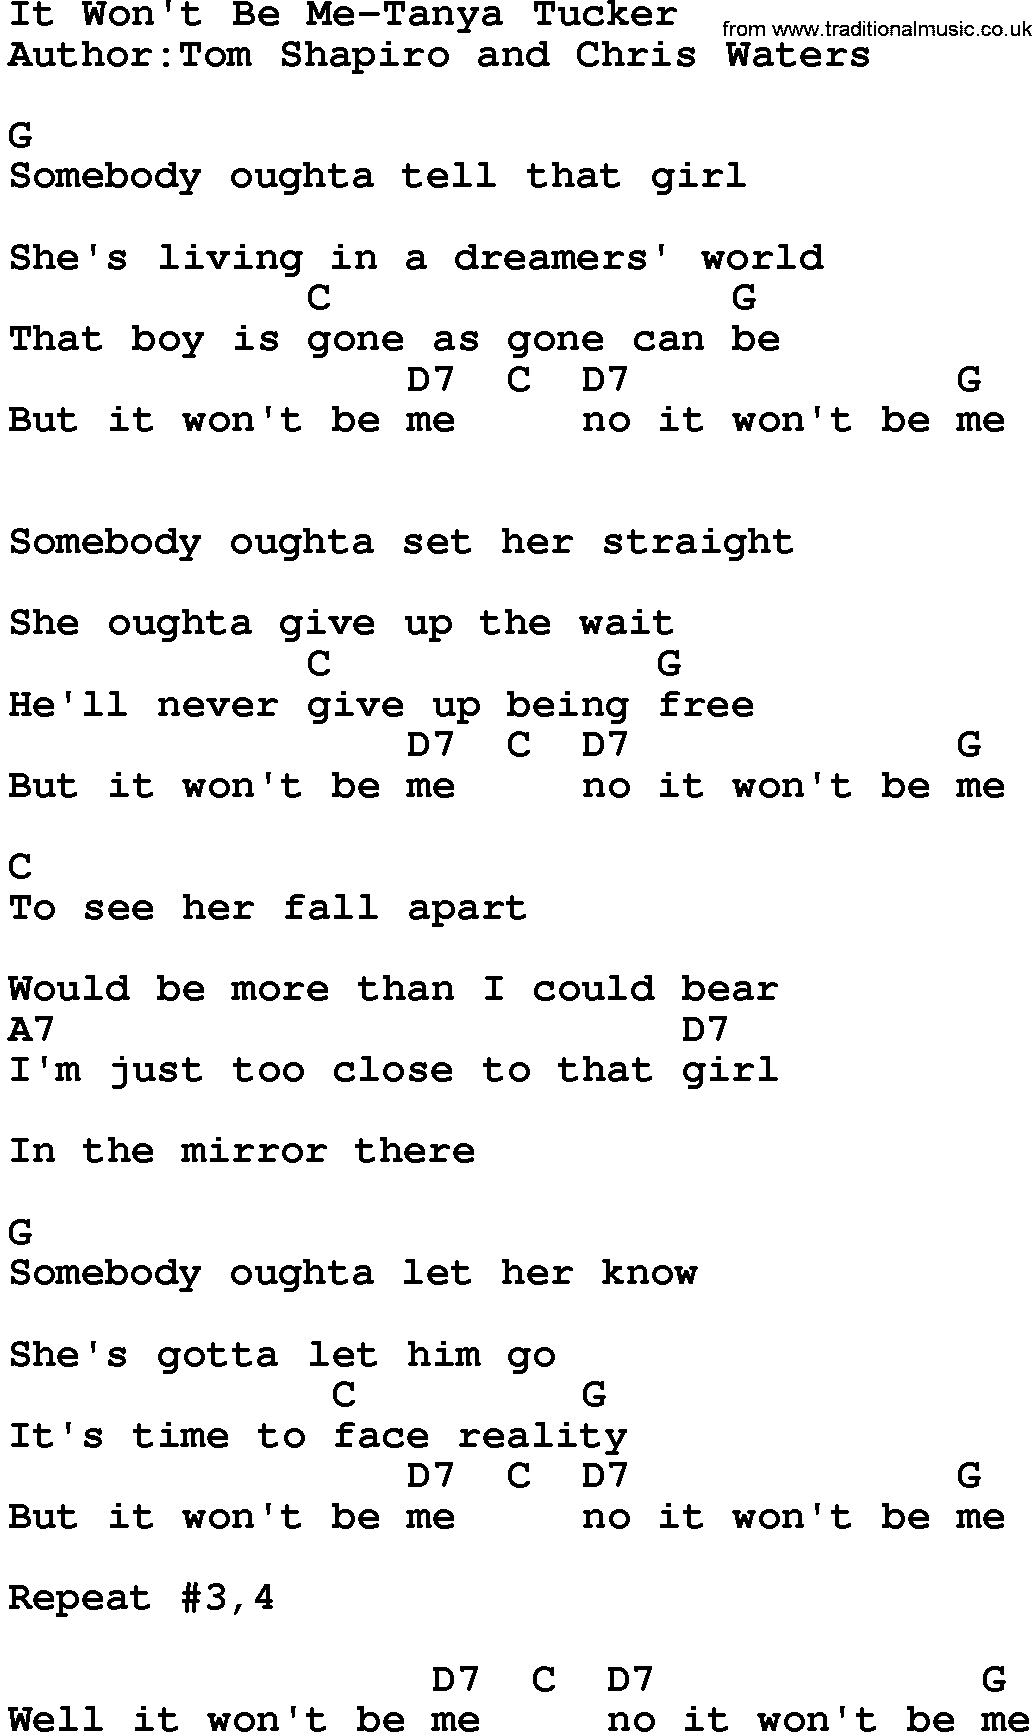 Country music song: It Won't Be Me-Tanya Tucker lyrics and chords